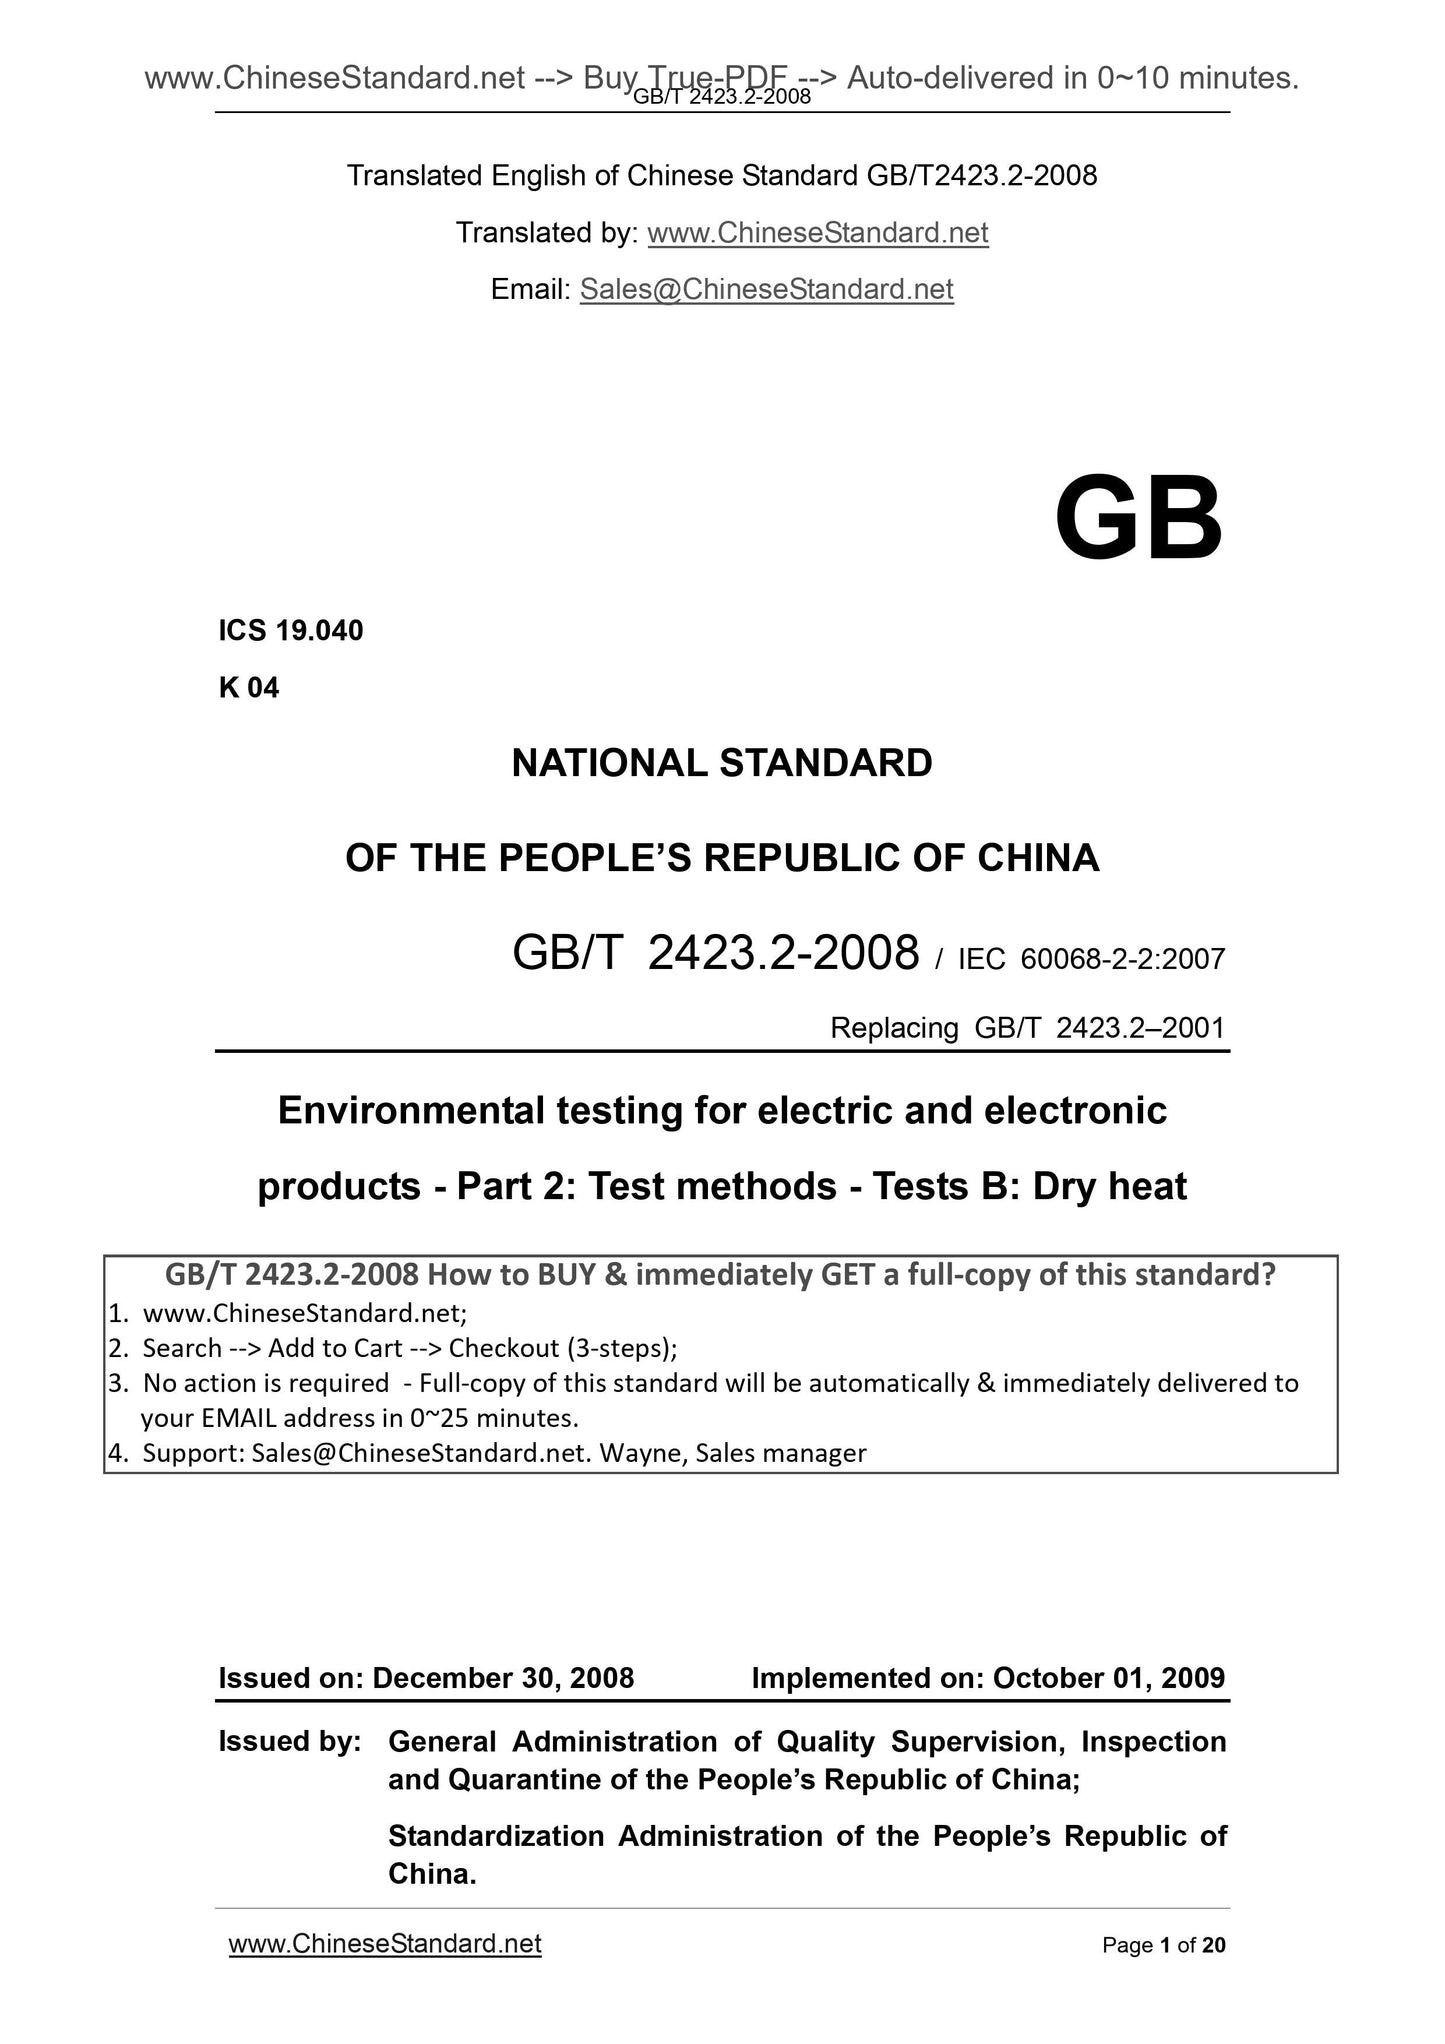 GB/T 2423.2-2008 Page 1